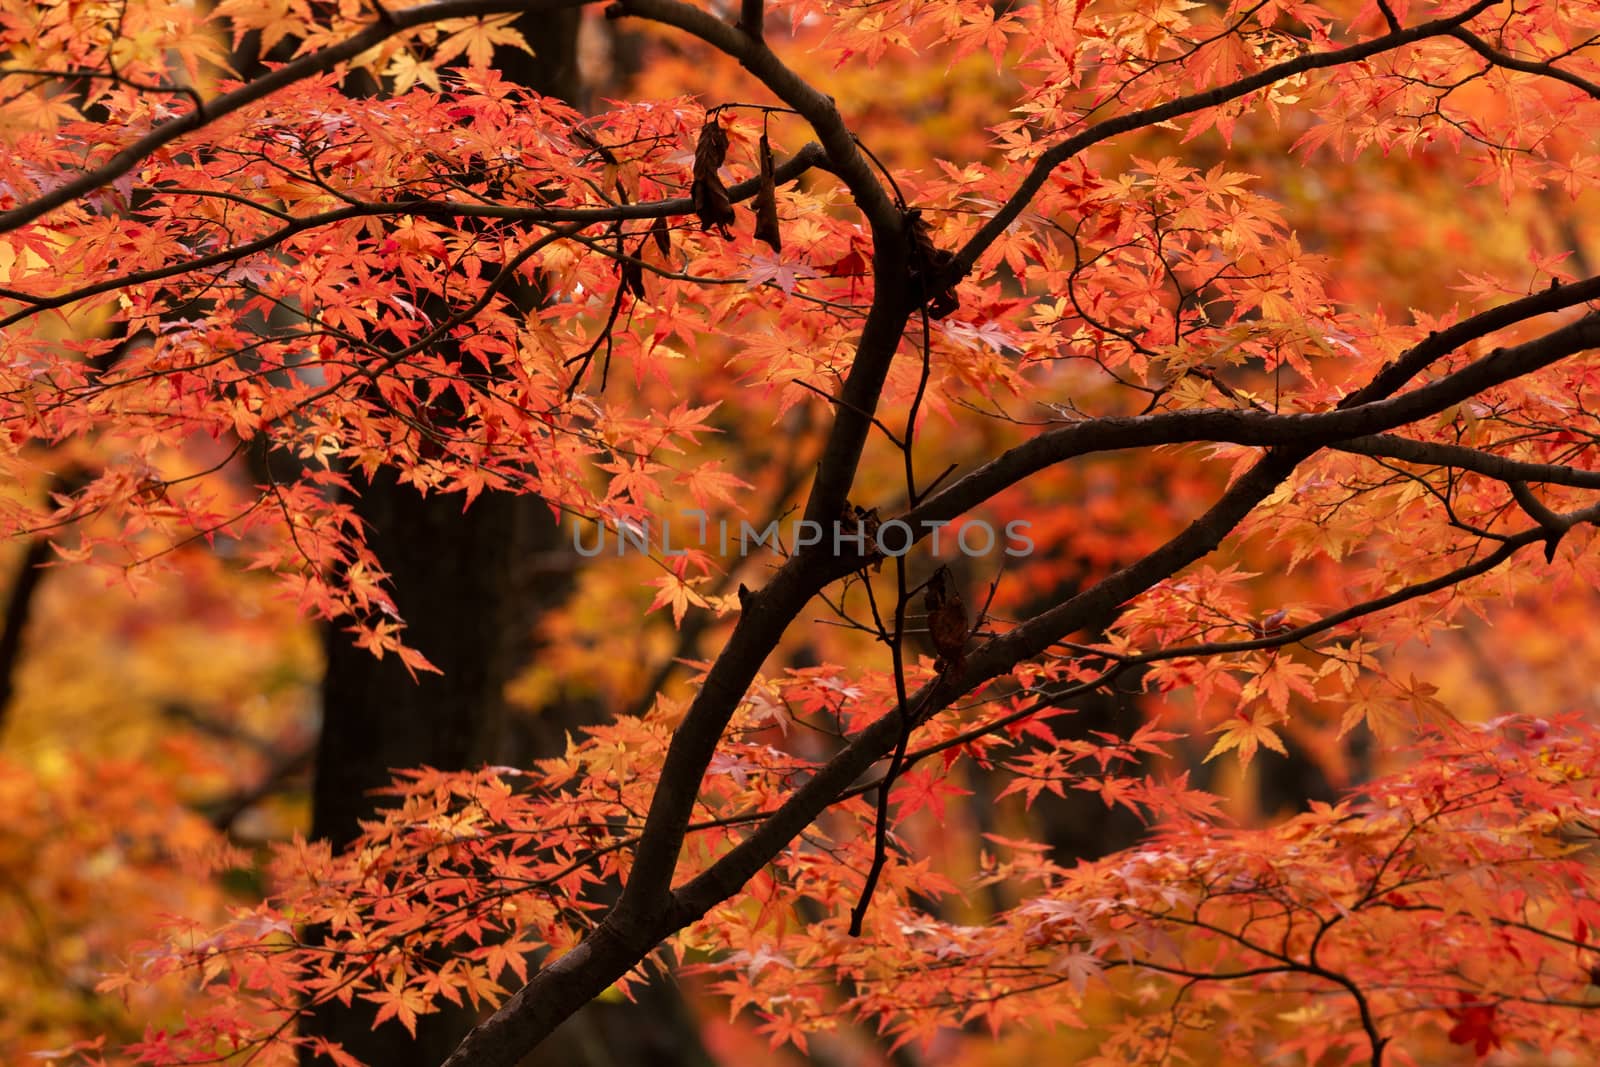 Branches of vibrant reds and orange coloured leaves in the Autumn season